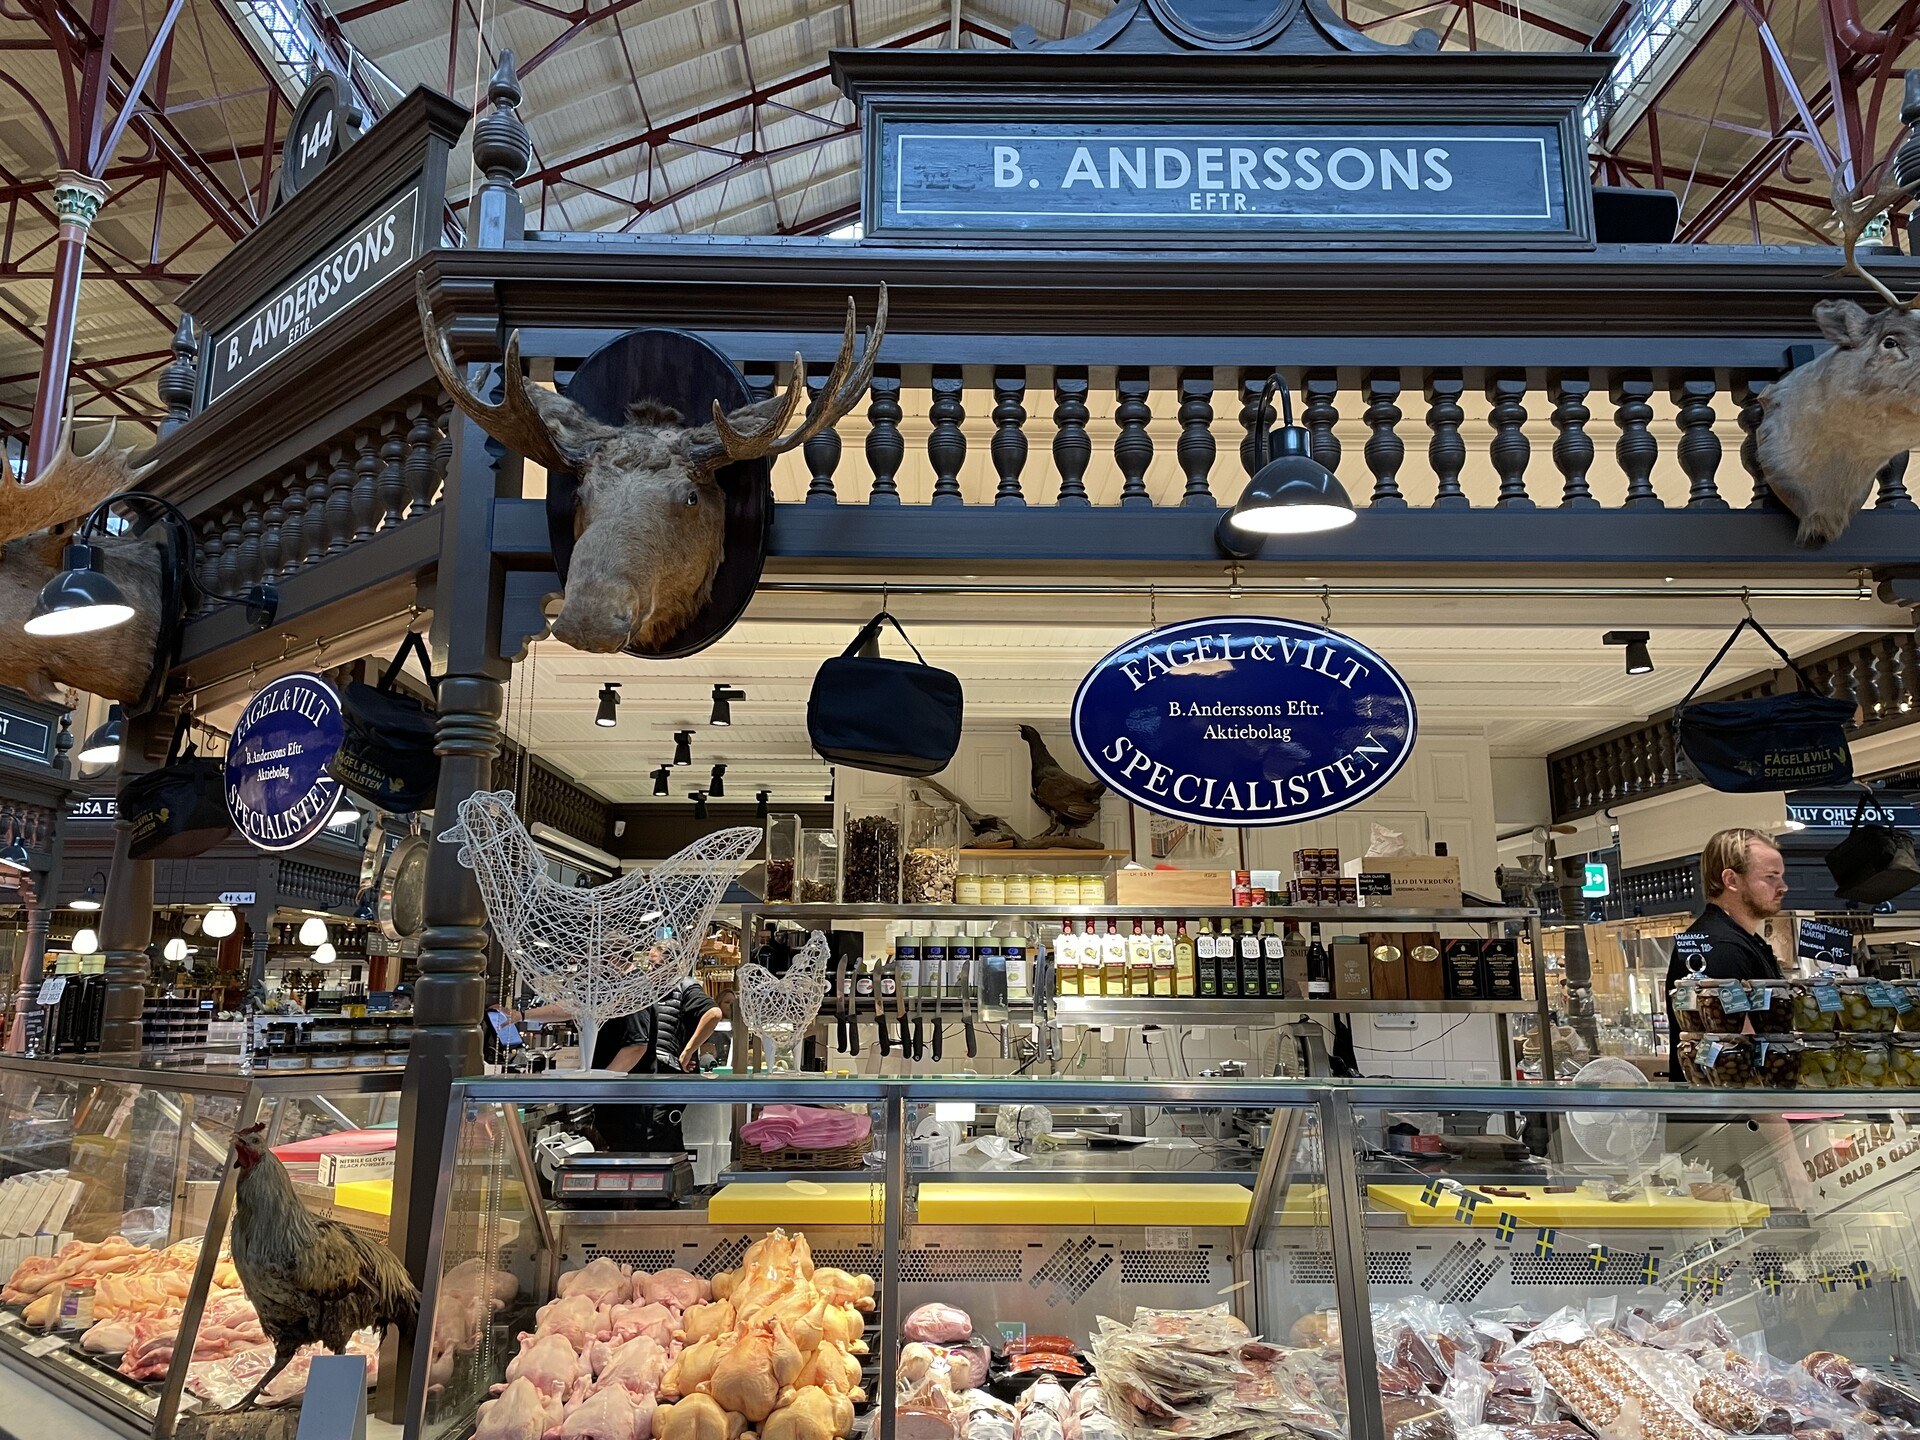 A meat stall labeled B. Anderssons with gratuitous (though arguably relevant) taxidermy mounted above the products